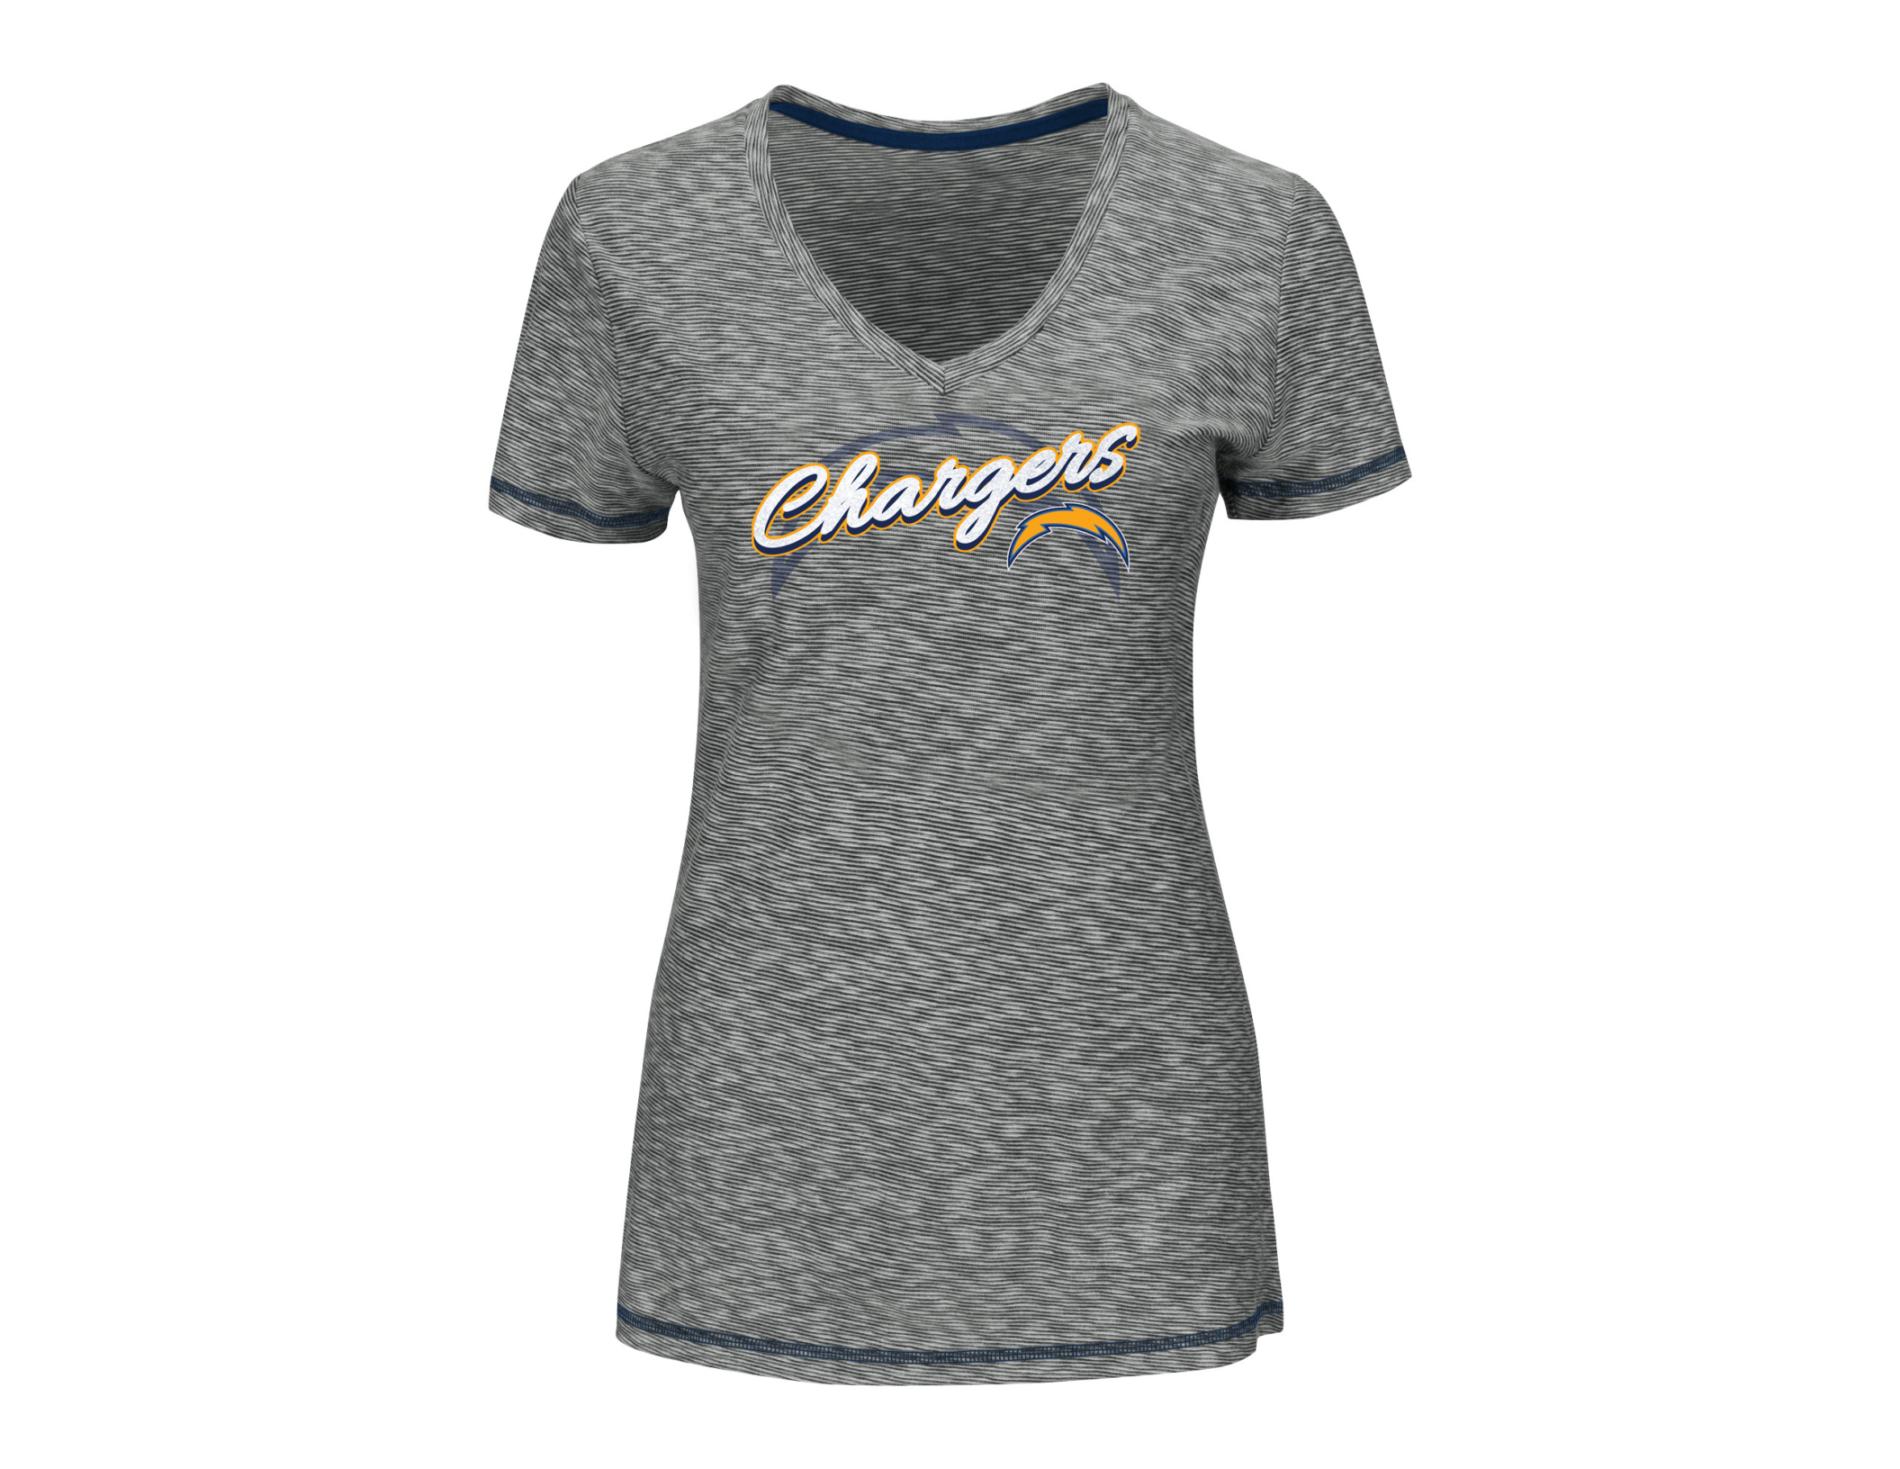 NFL Women's Ribbed Graphic T-Shirt - San Diego Chargers